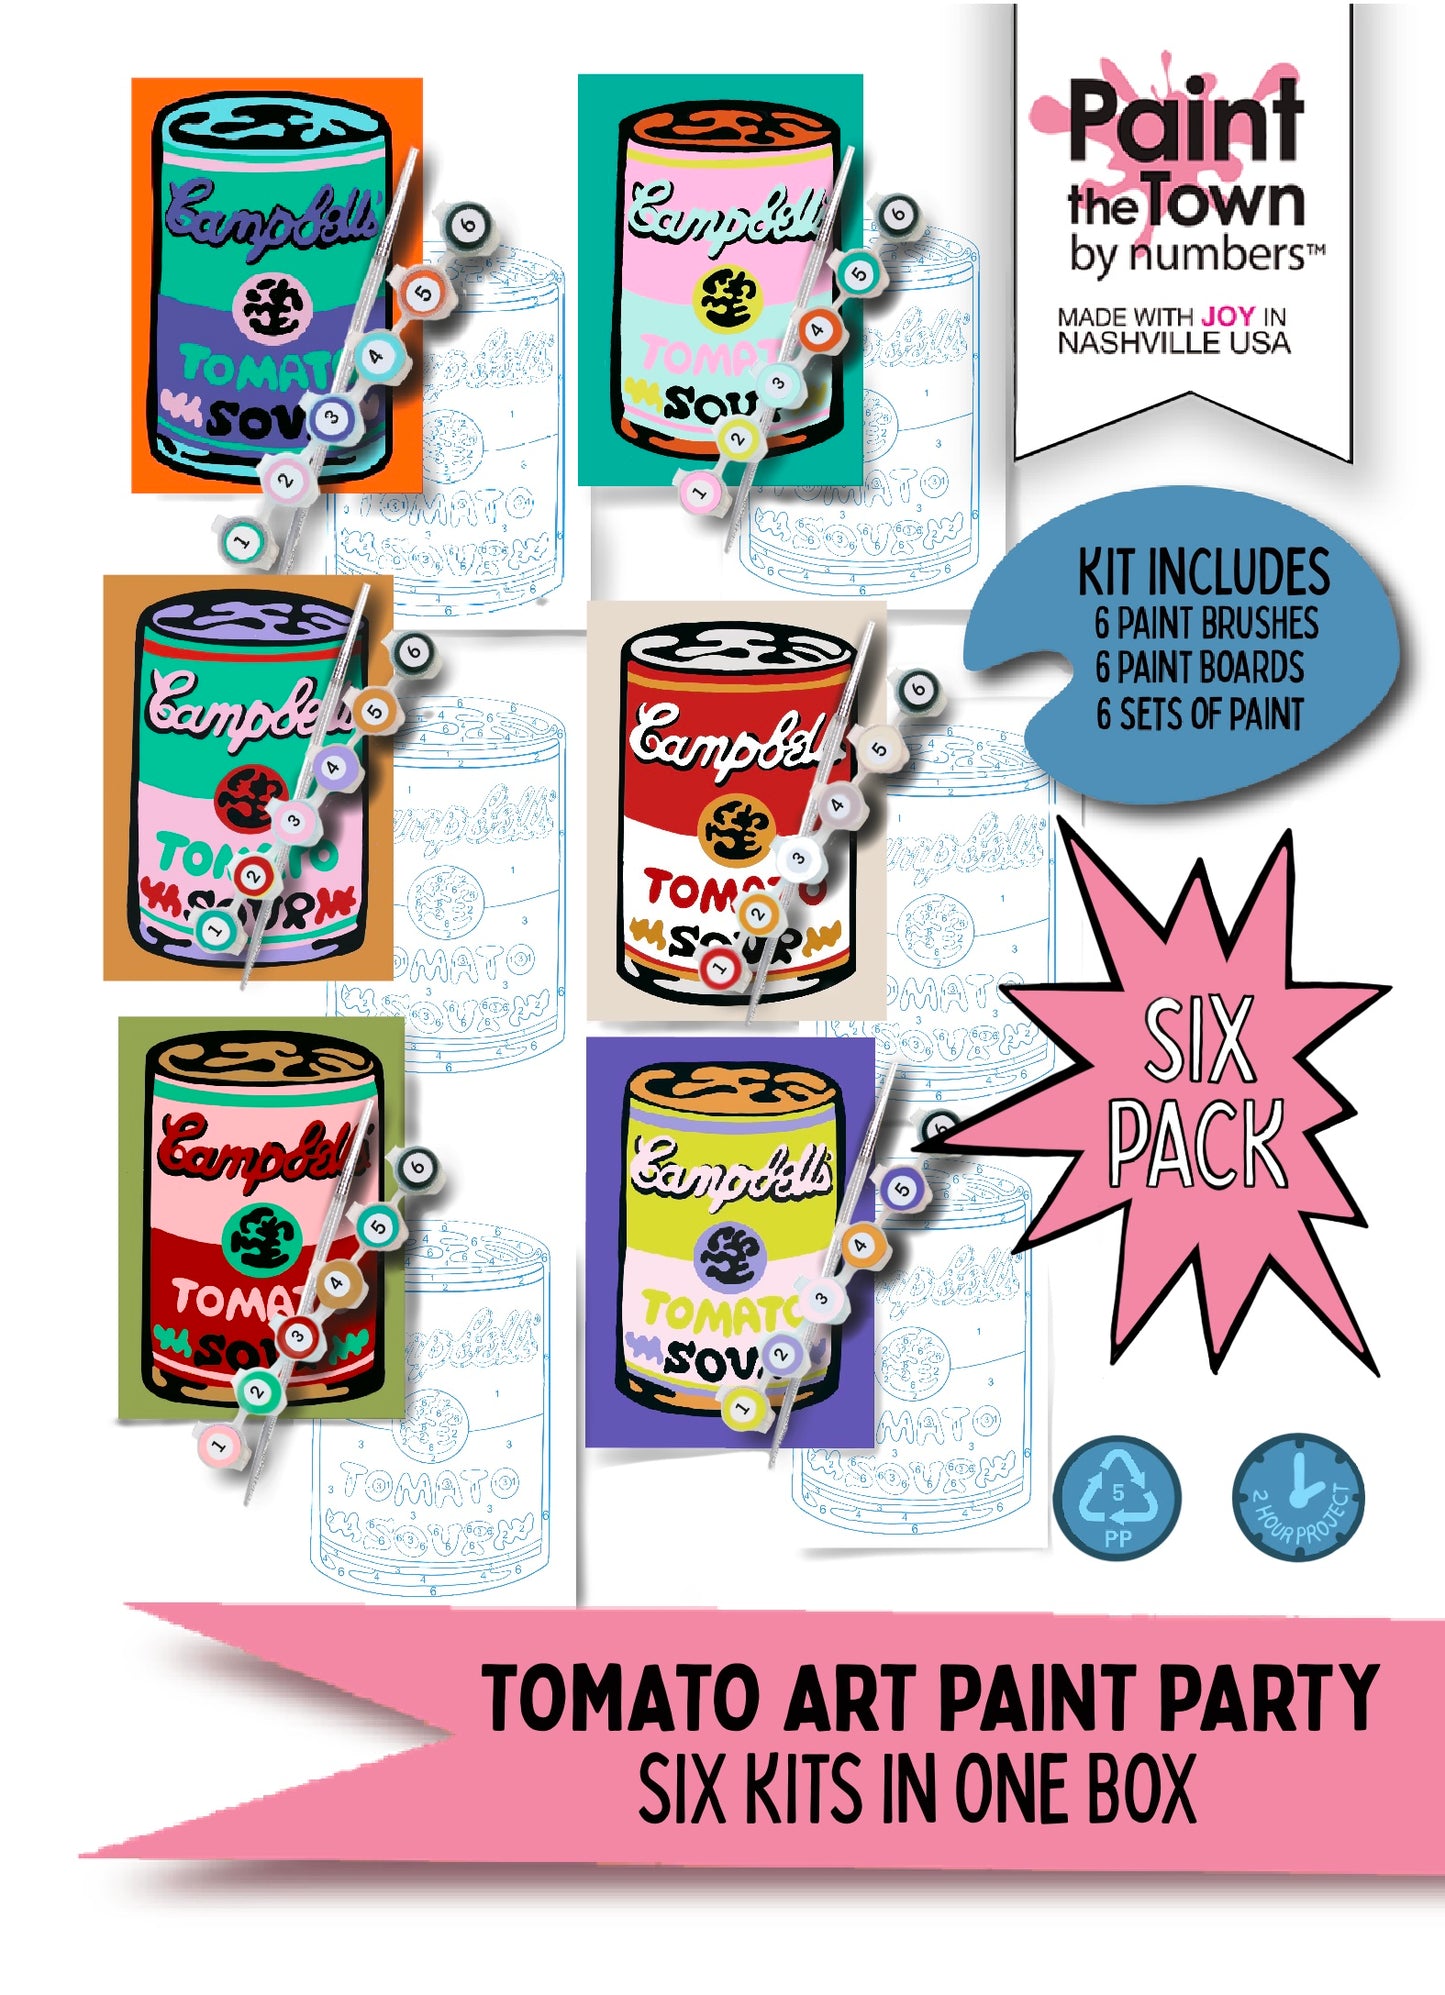 Tomato Soup Can ‘Six Pack’ Paint by Number Kit; Same 5”x7” Design on Six Paint Boards with Six Different Color Combinations and Six Paint Brushes